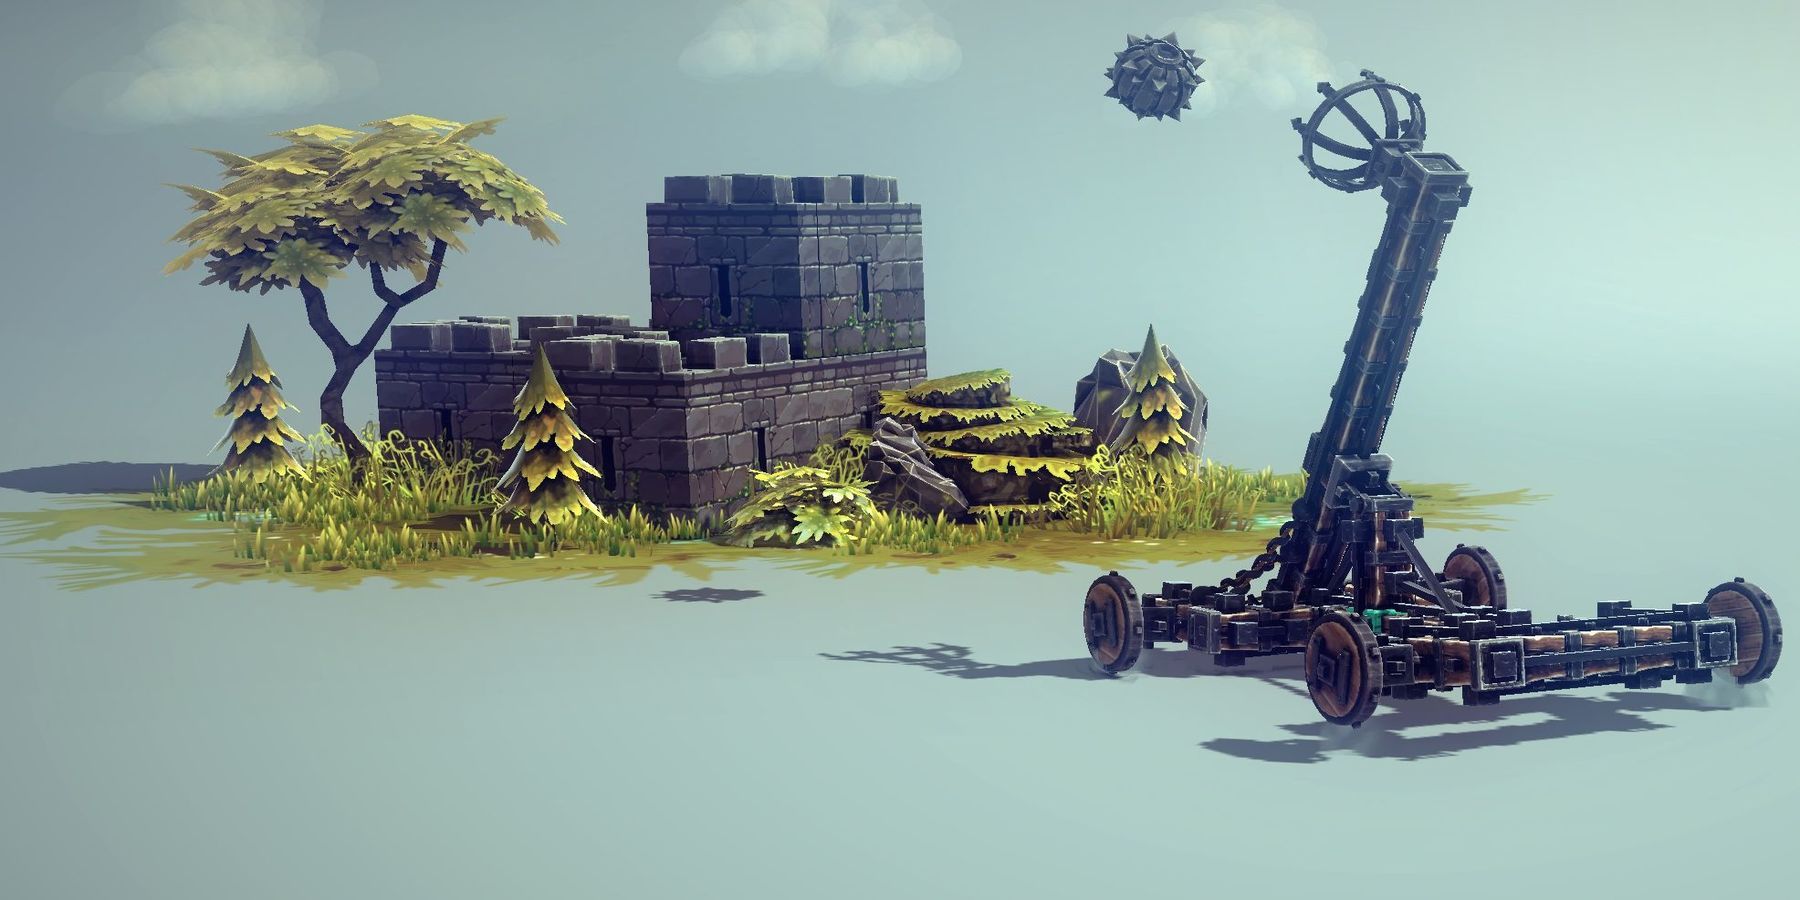 Besiege Console (Game Preview) Launches February 10 with Xbox Game Pass -  Xbox Wire